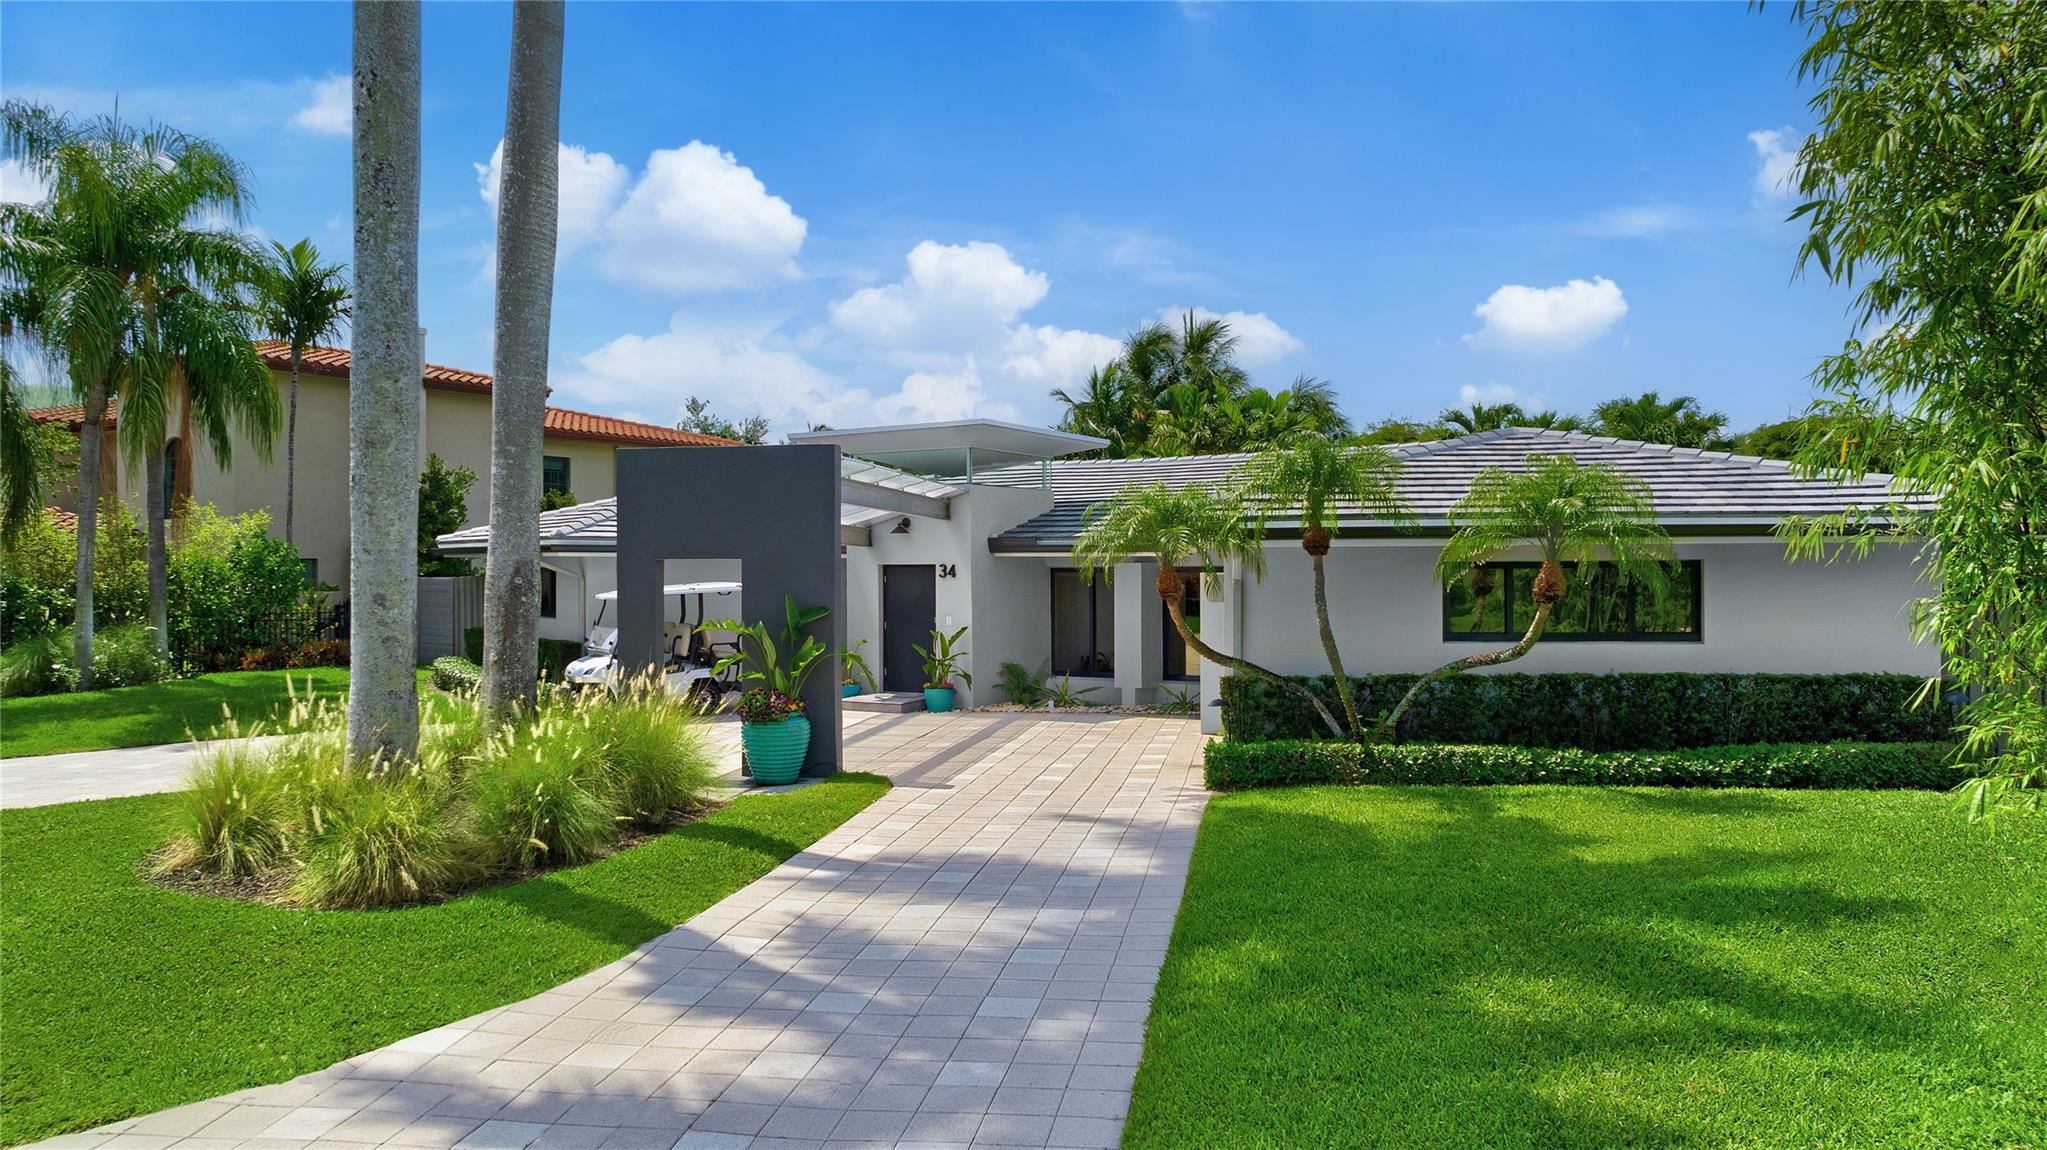 Live in one of the most desired locations in Fort Lauderdale. Gated Sea Ranch Lakes property with well appointed finishes throughout the home. The community has its own Beach Club, pool and over 220 ft of beach front. This mid-century modern custom home completely remodeled by renowned architect Anthony Abbate. Bright, open and sophisticated and professionally designed home is ready for entertaining and fun in the sun. Featuring three bedrooms with potential 4th sleeping area and three bathrooms & Modern kitchen with European cabinetry. Minutes to Lauderdale By the Sea Restaurants & entertaining. 15 Minutes to Las Olas Blvd restaurants, shopping and nightlife and Fort Lauderdale Beach. 20 minutes to Ft. Lauderdale Int'l Airport.
Priced to sell so don't miss this opportunity!!